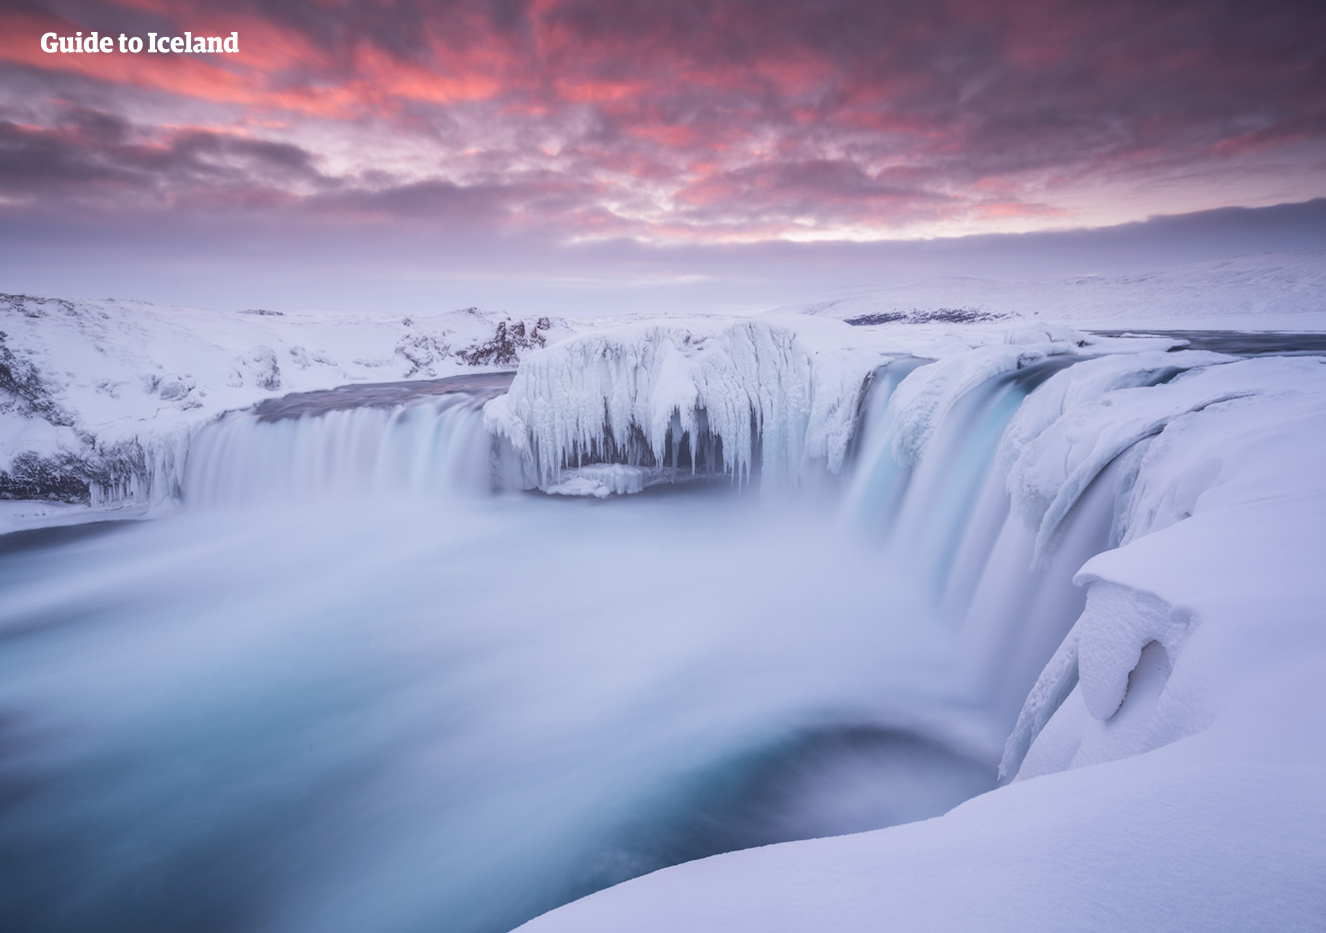 The waterfalls of north Iceland are beautiful when encased in ice in winter.